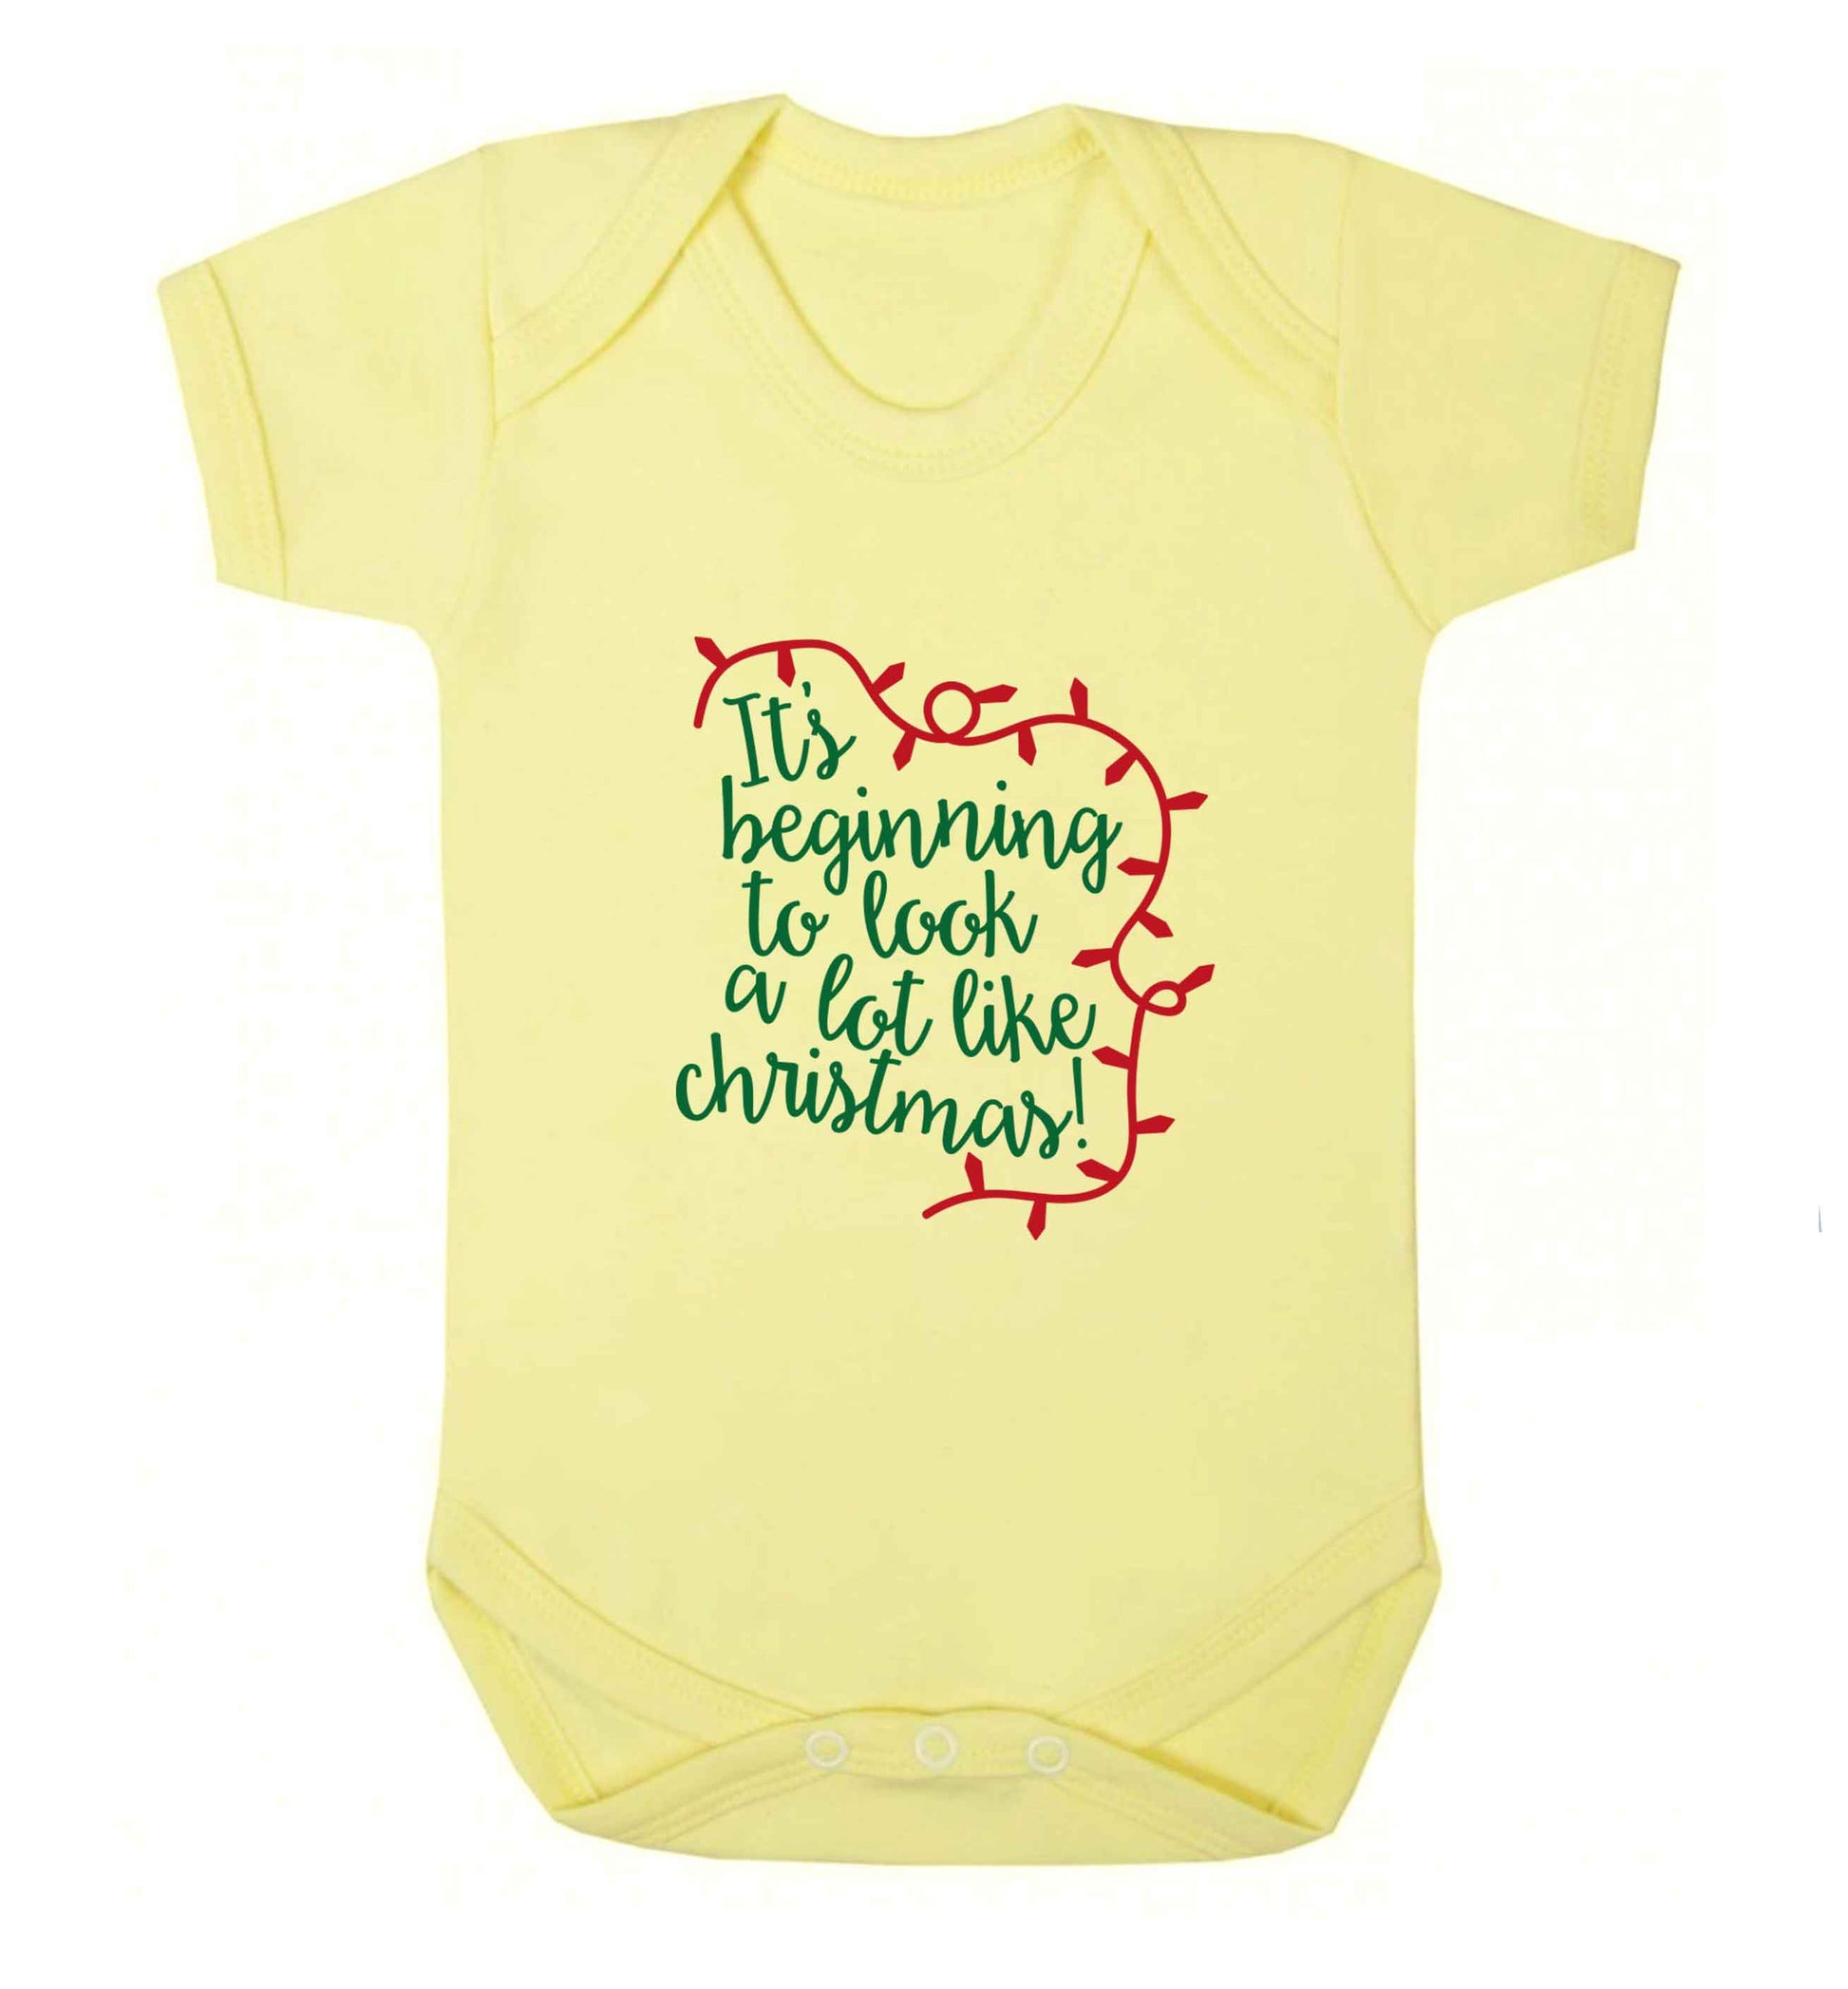 It's beginning to look a lot like Christmas baby vest pale yellow 18-24 months